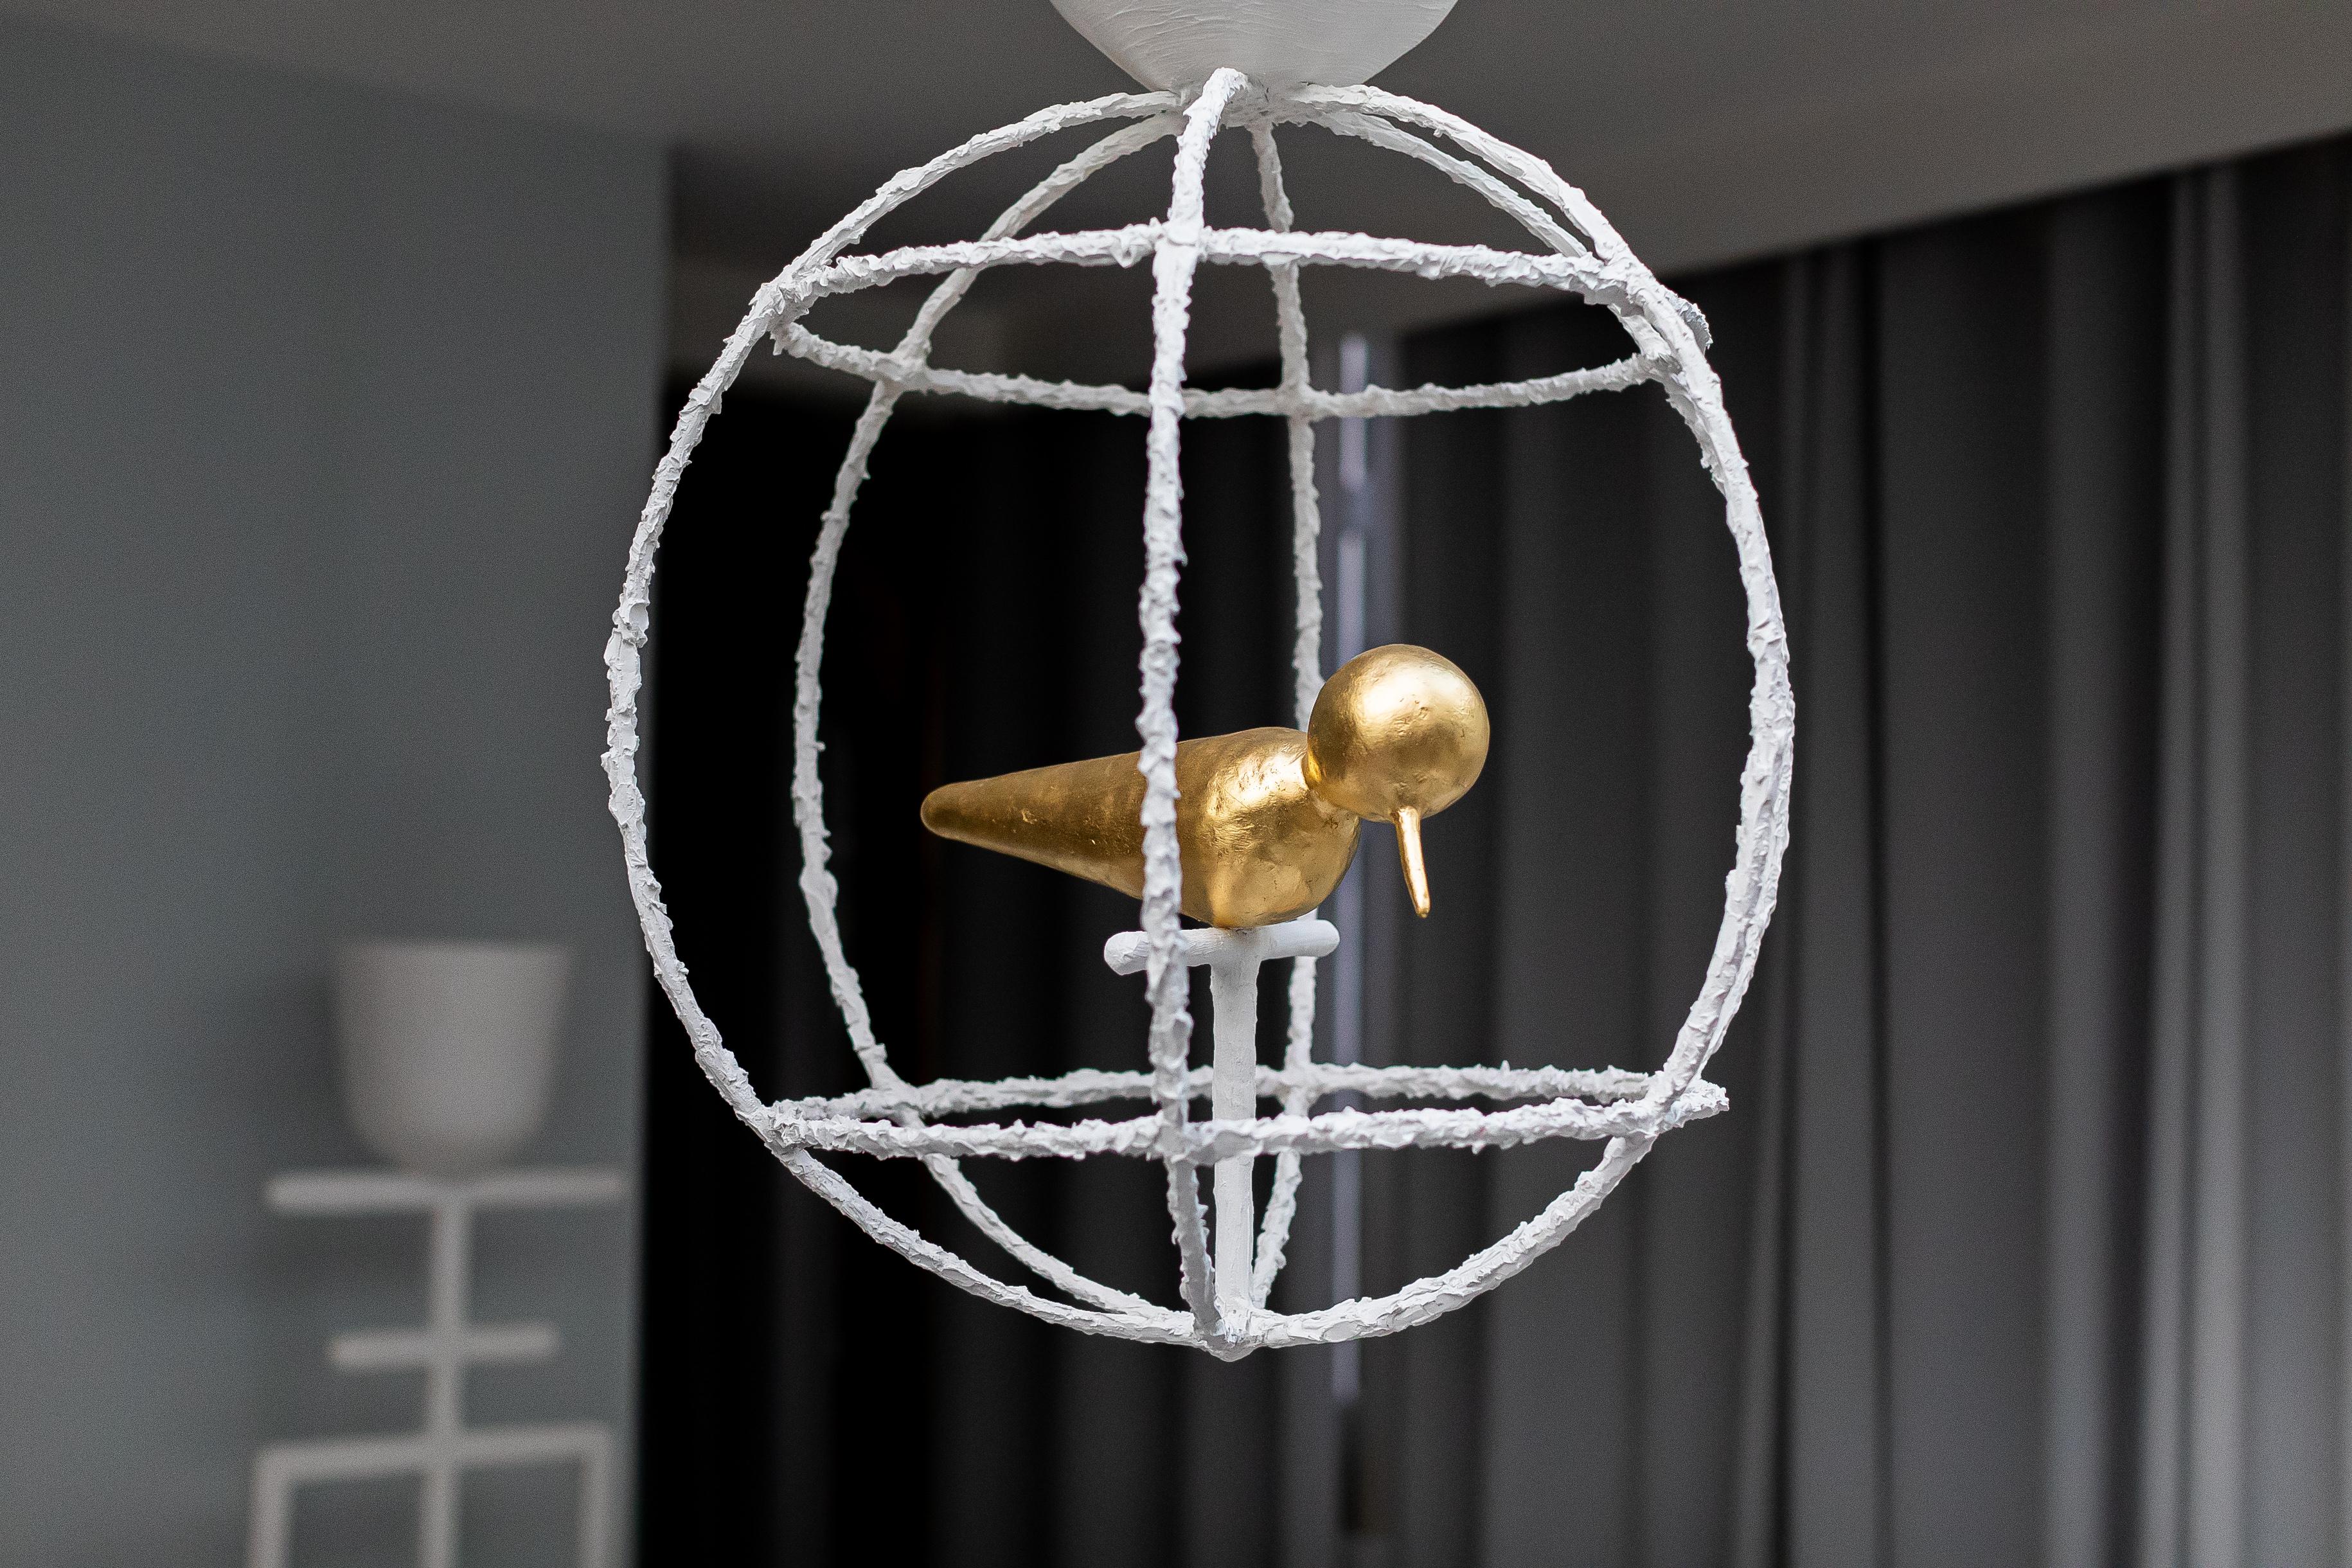 Colombe d'Or Lamp by Mathieu Challieres
Dimensions: H 90 x W 60 x D 60 cm.
Weight: 6 kg.
Materials: Golden leaves 